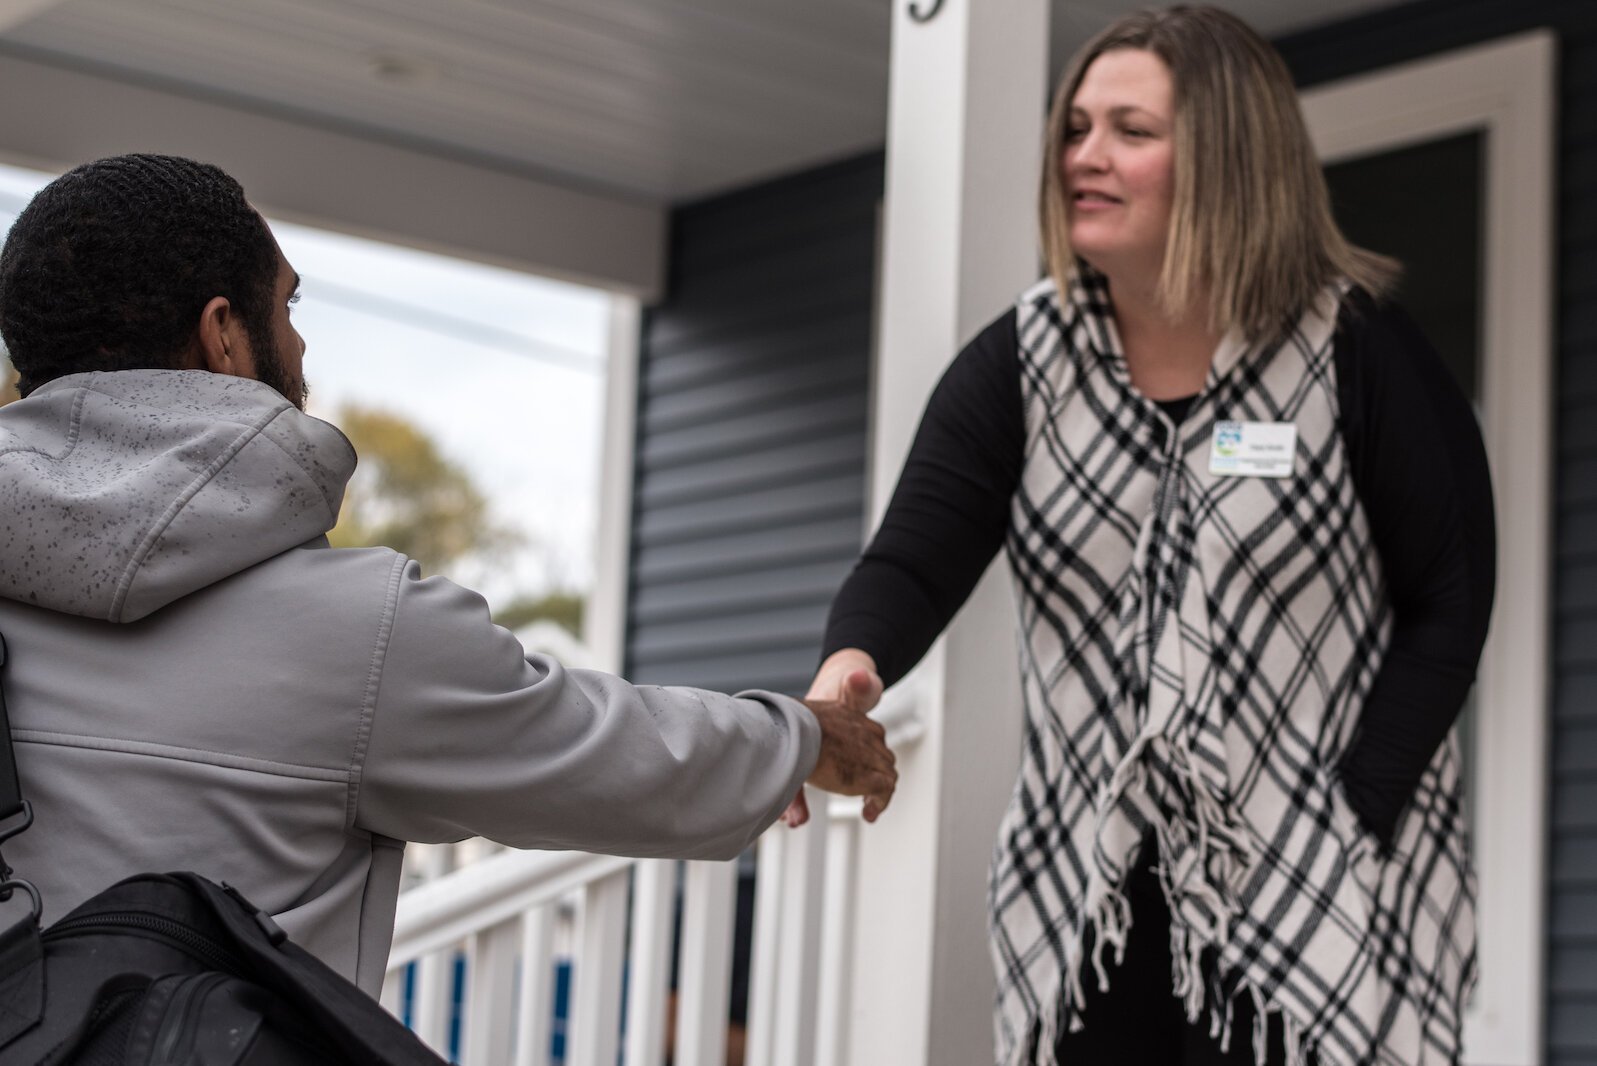 Dara Smith, neighborhood services specialist with KNHS, greets visitors at the unveiling on Tuesday, Oct. 25, 2022, of a new duplex at 203-205 Wall Street in Kalamazoo’s Vine Neighborhood.